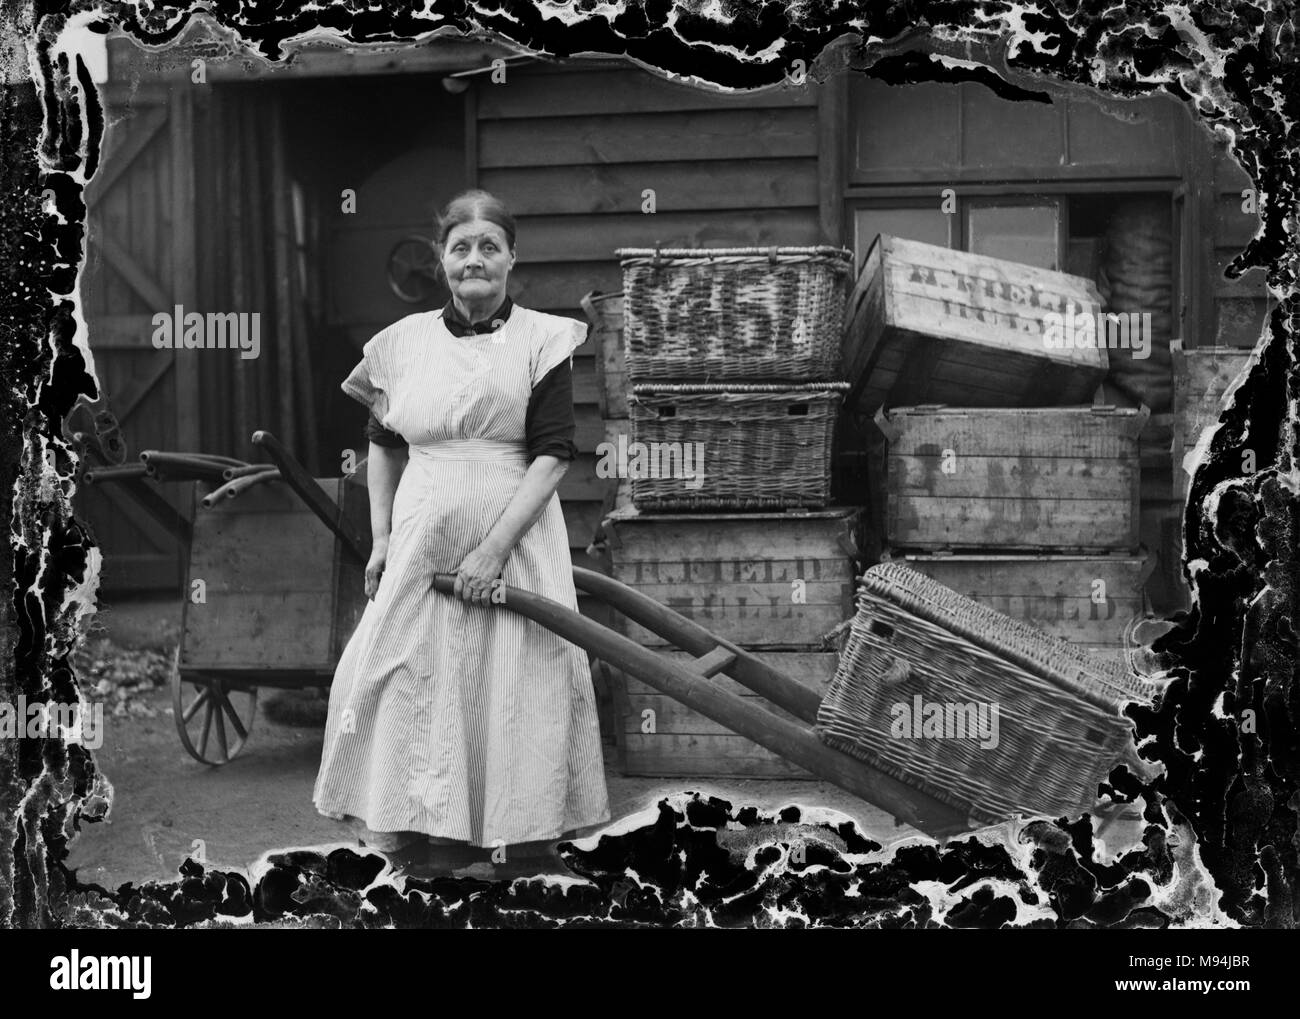 Working woman on the streets of London is shown in a vintage glass negative with damage on the edge framing the subject, ca. 1910. Stock Photo